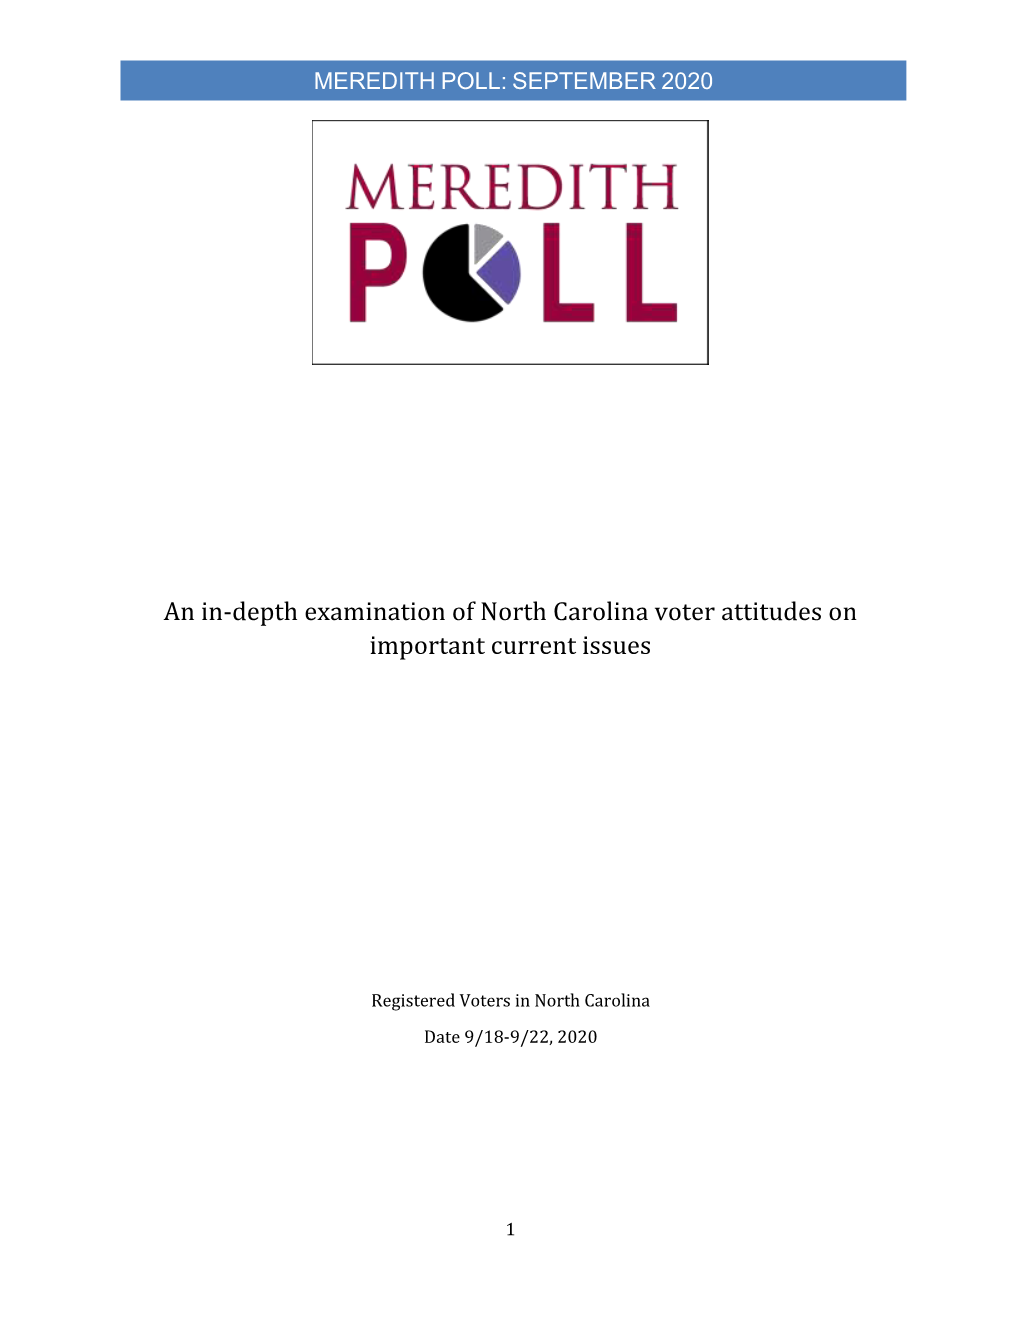 An In-Depth Examination of North Carolina Voter Attitudes on Important Current Issues